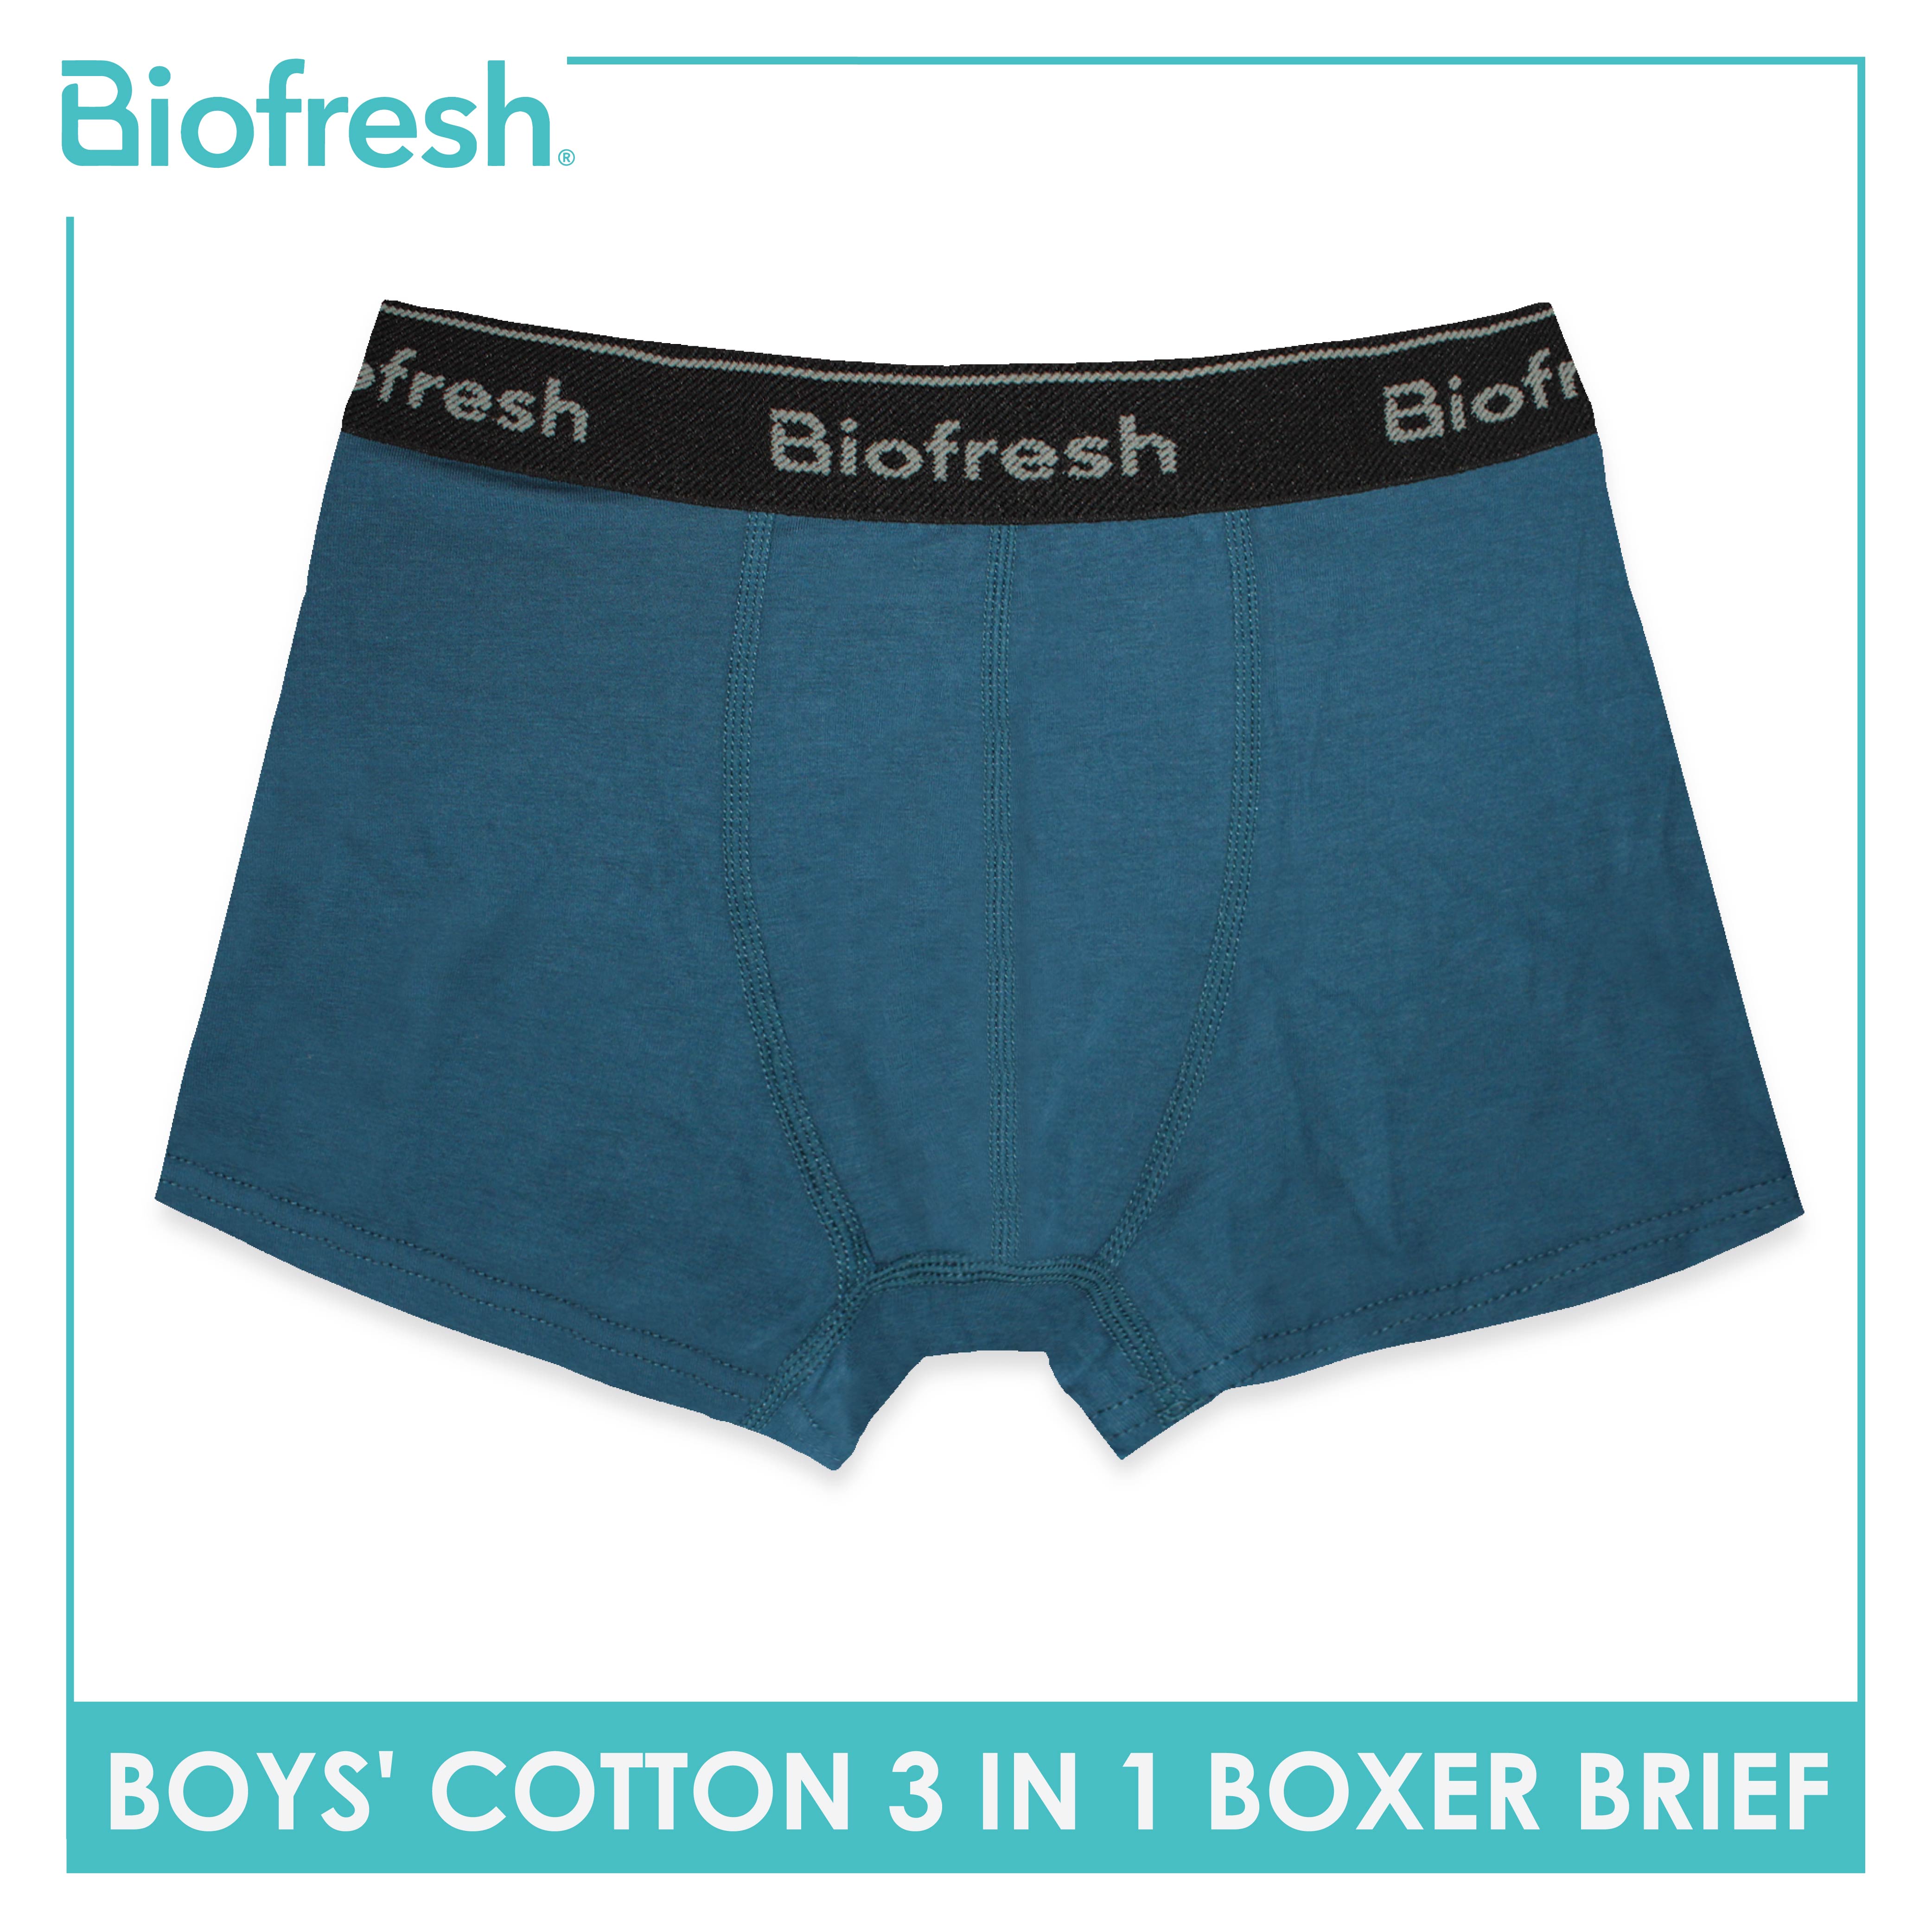 Boys' Antimicrobial Boxer Brief Philippines